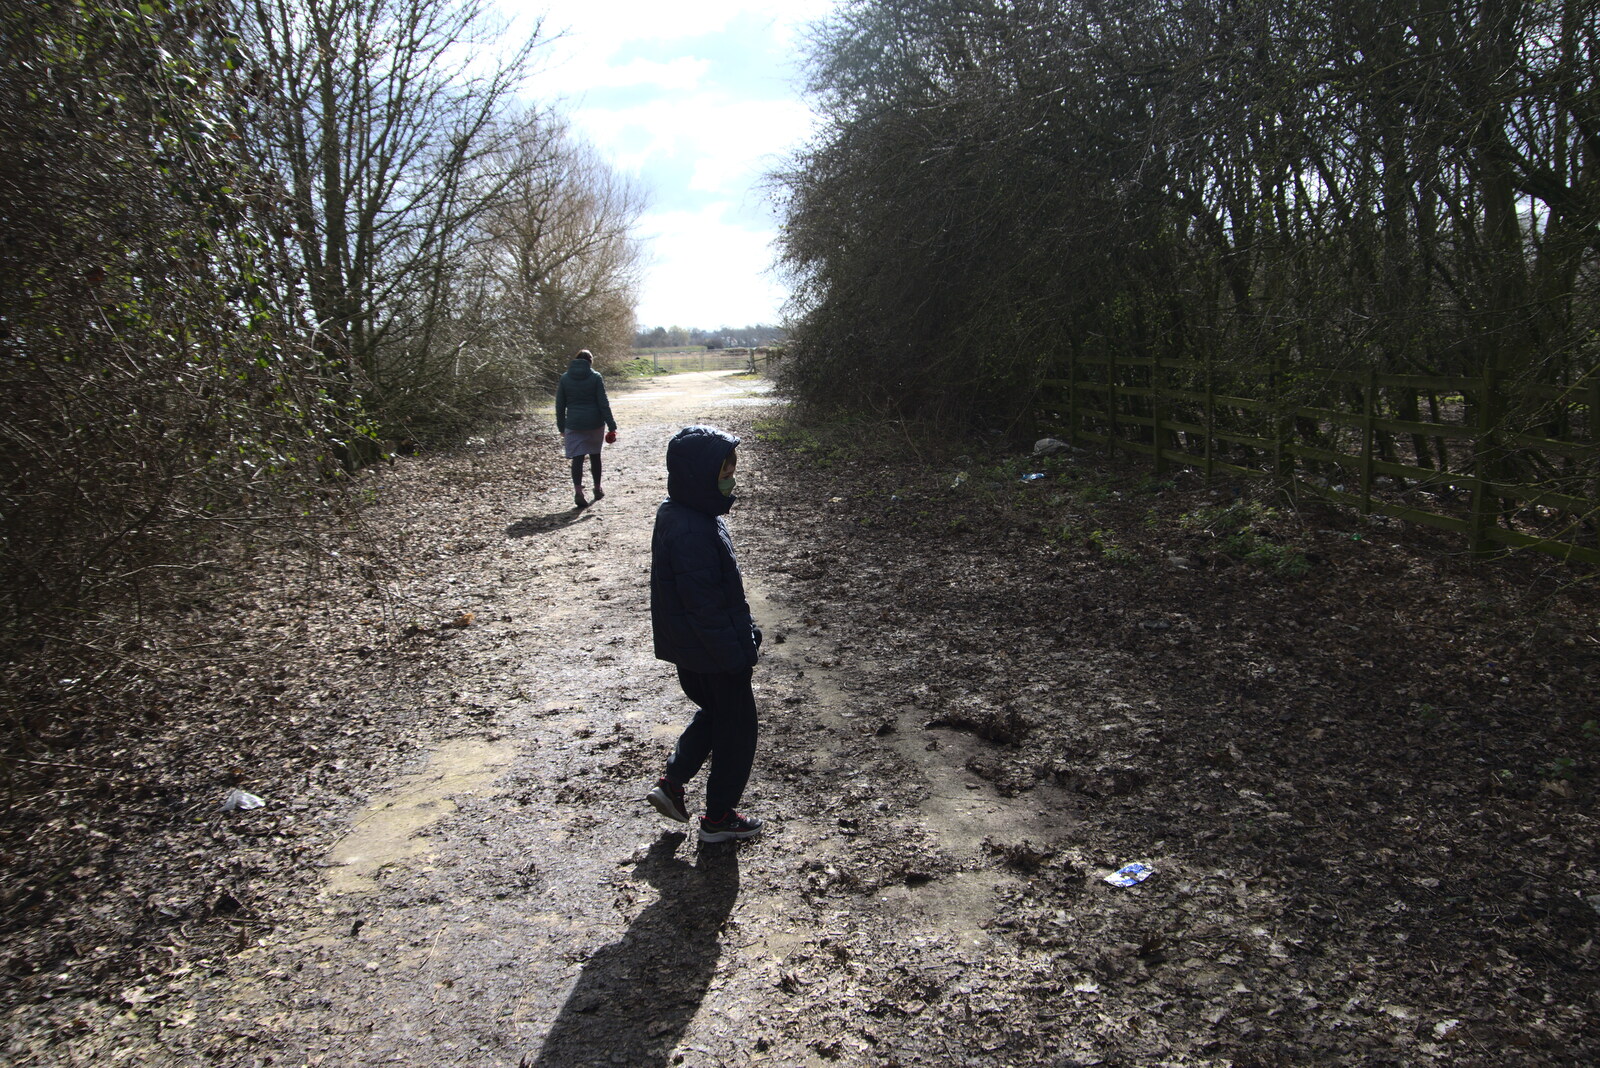 Isobel and Harry head off onto the airfield from Another Walk on Eye Airfield, Eye, Suffolk - 14th March 2021